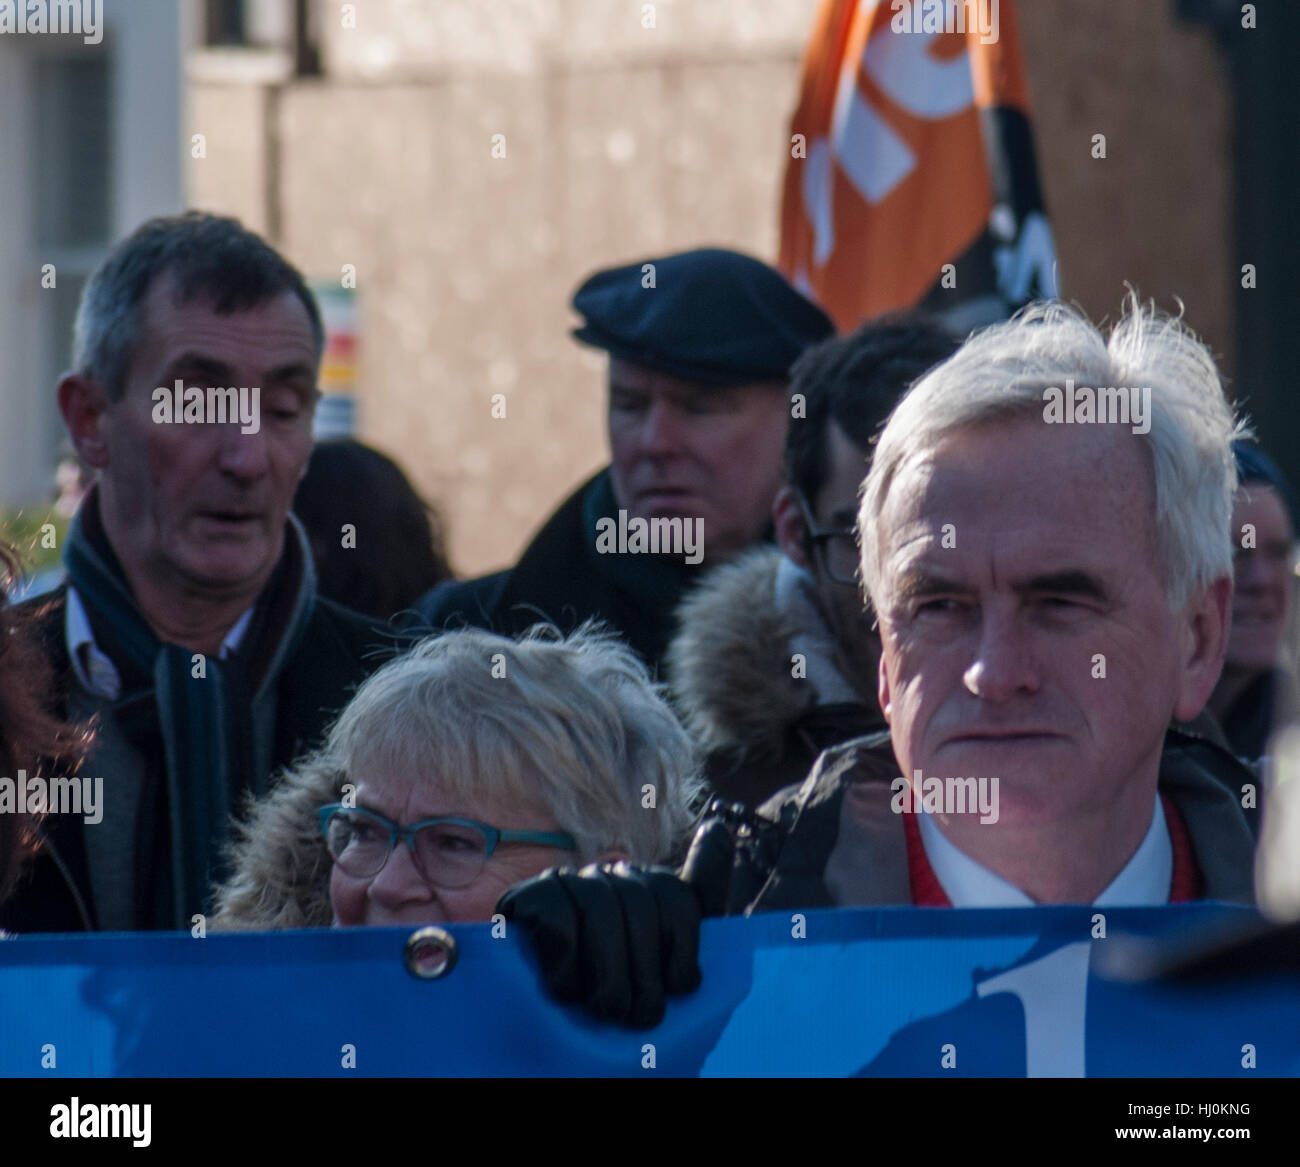 Brighton, Sussex, UK..21 January 2017..Hundreds of campaigners fighting to save the NHS attended a march & rally on the South Coast. Labour Shadow Chancellor John McDonnell addressed the rally at Brighton Station citing Tory underfunding of Health & Social Care.. Stock Photo